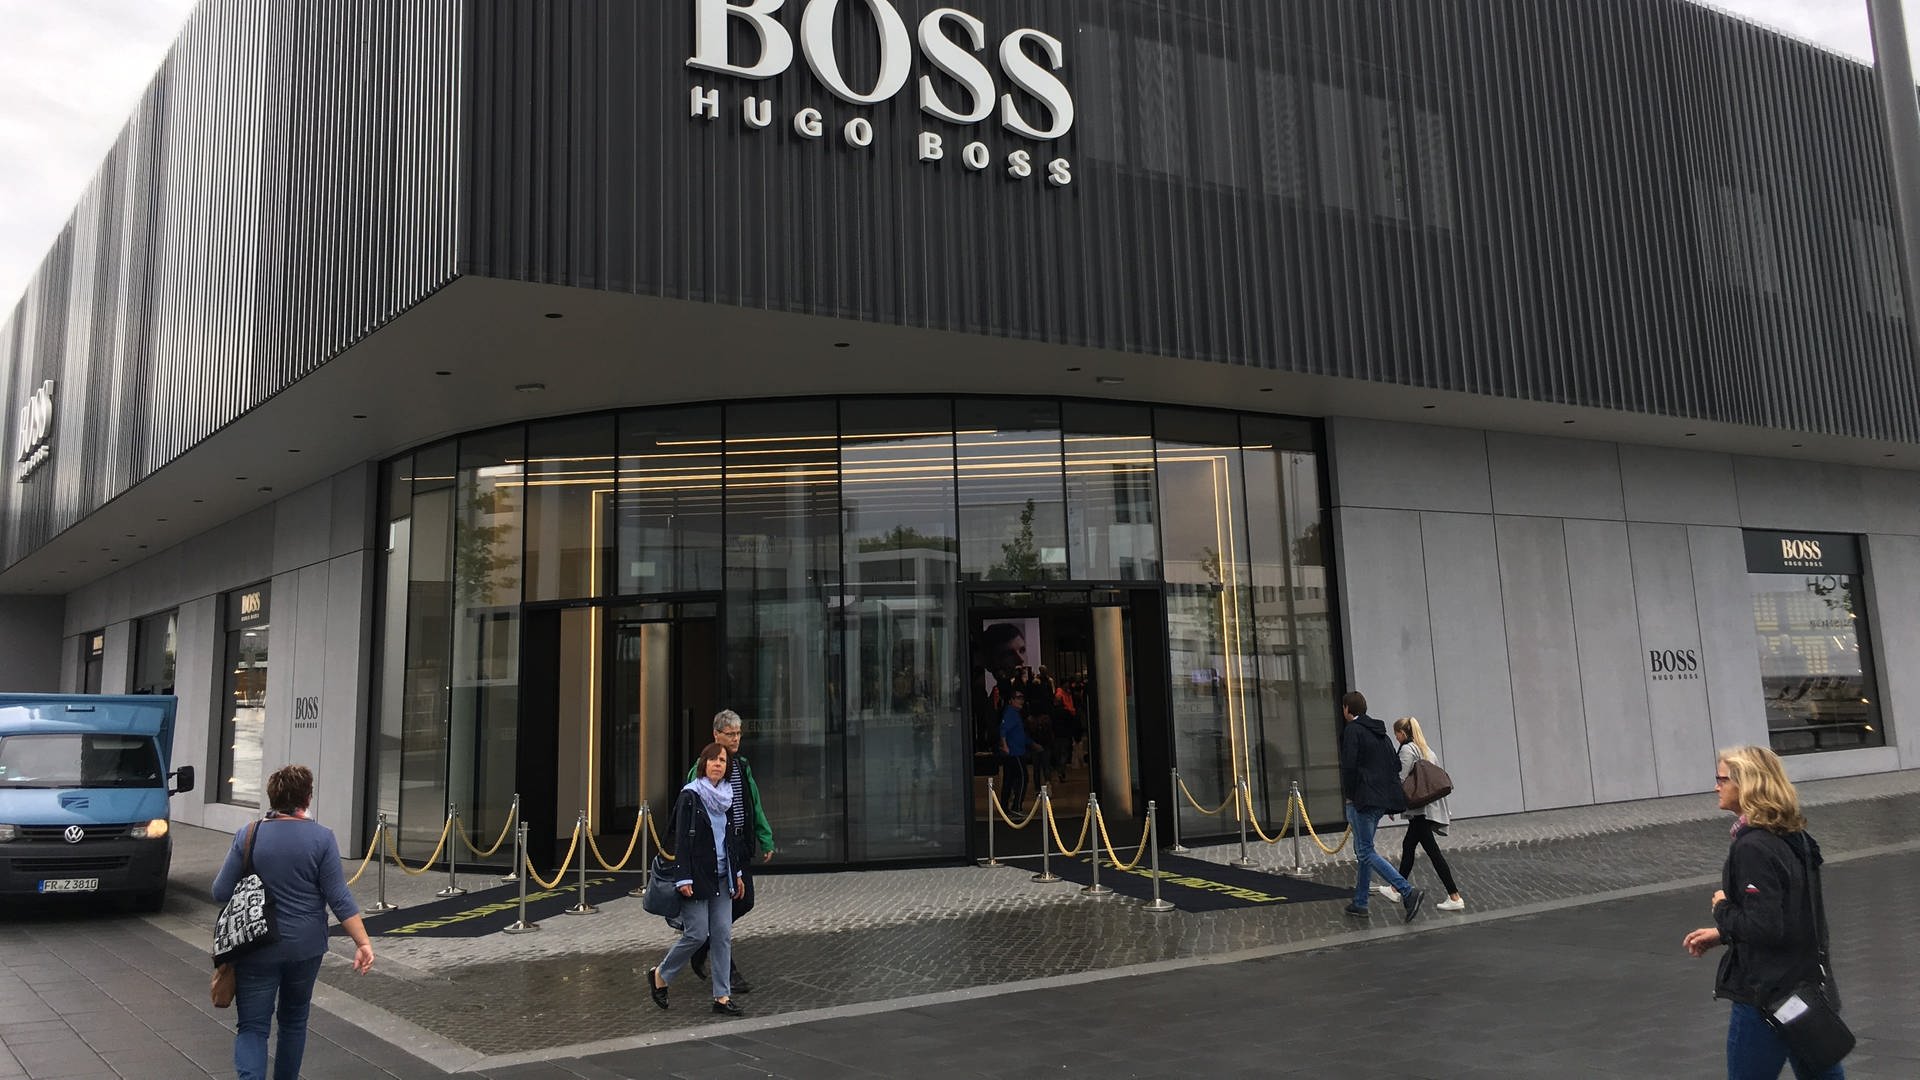 boss outlet